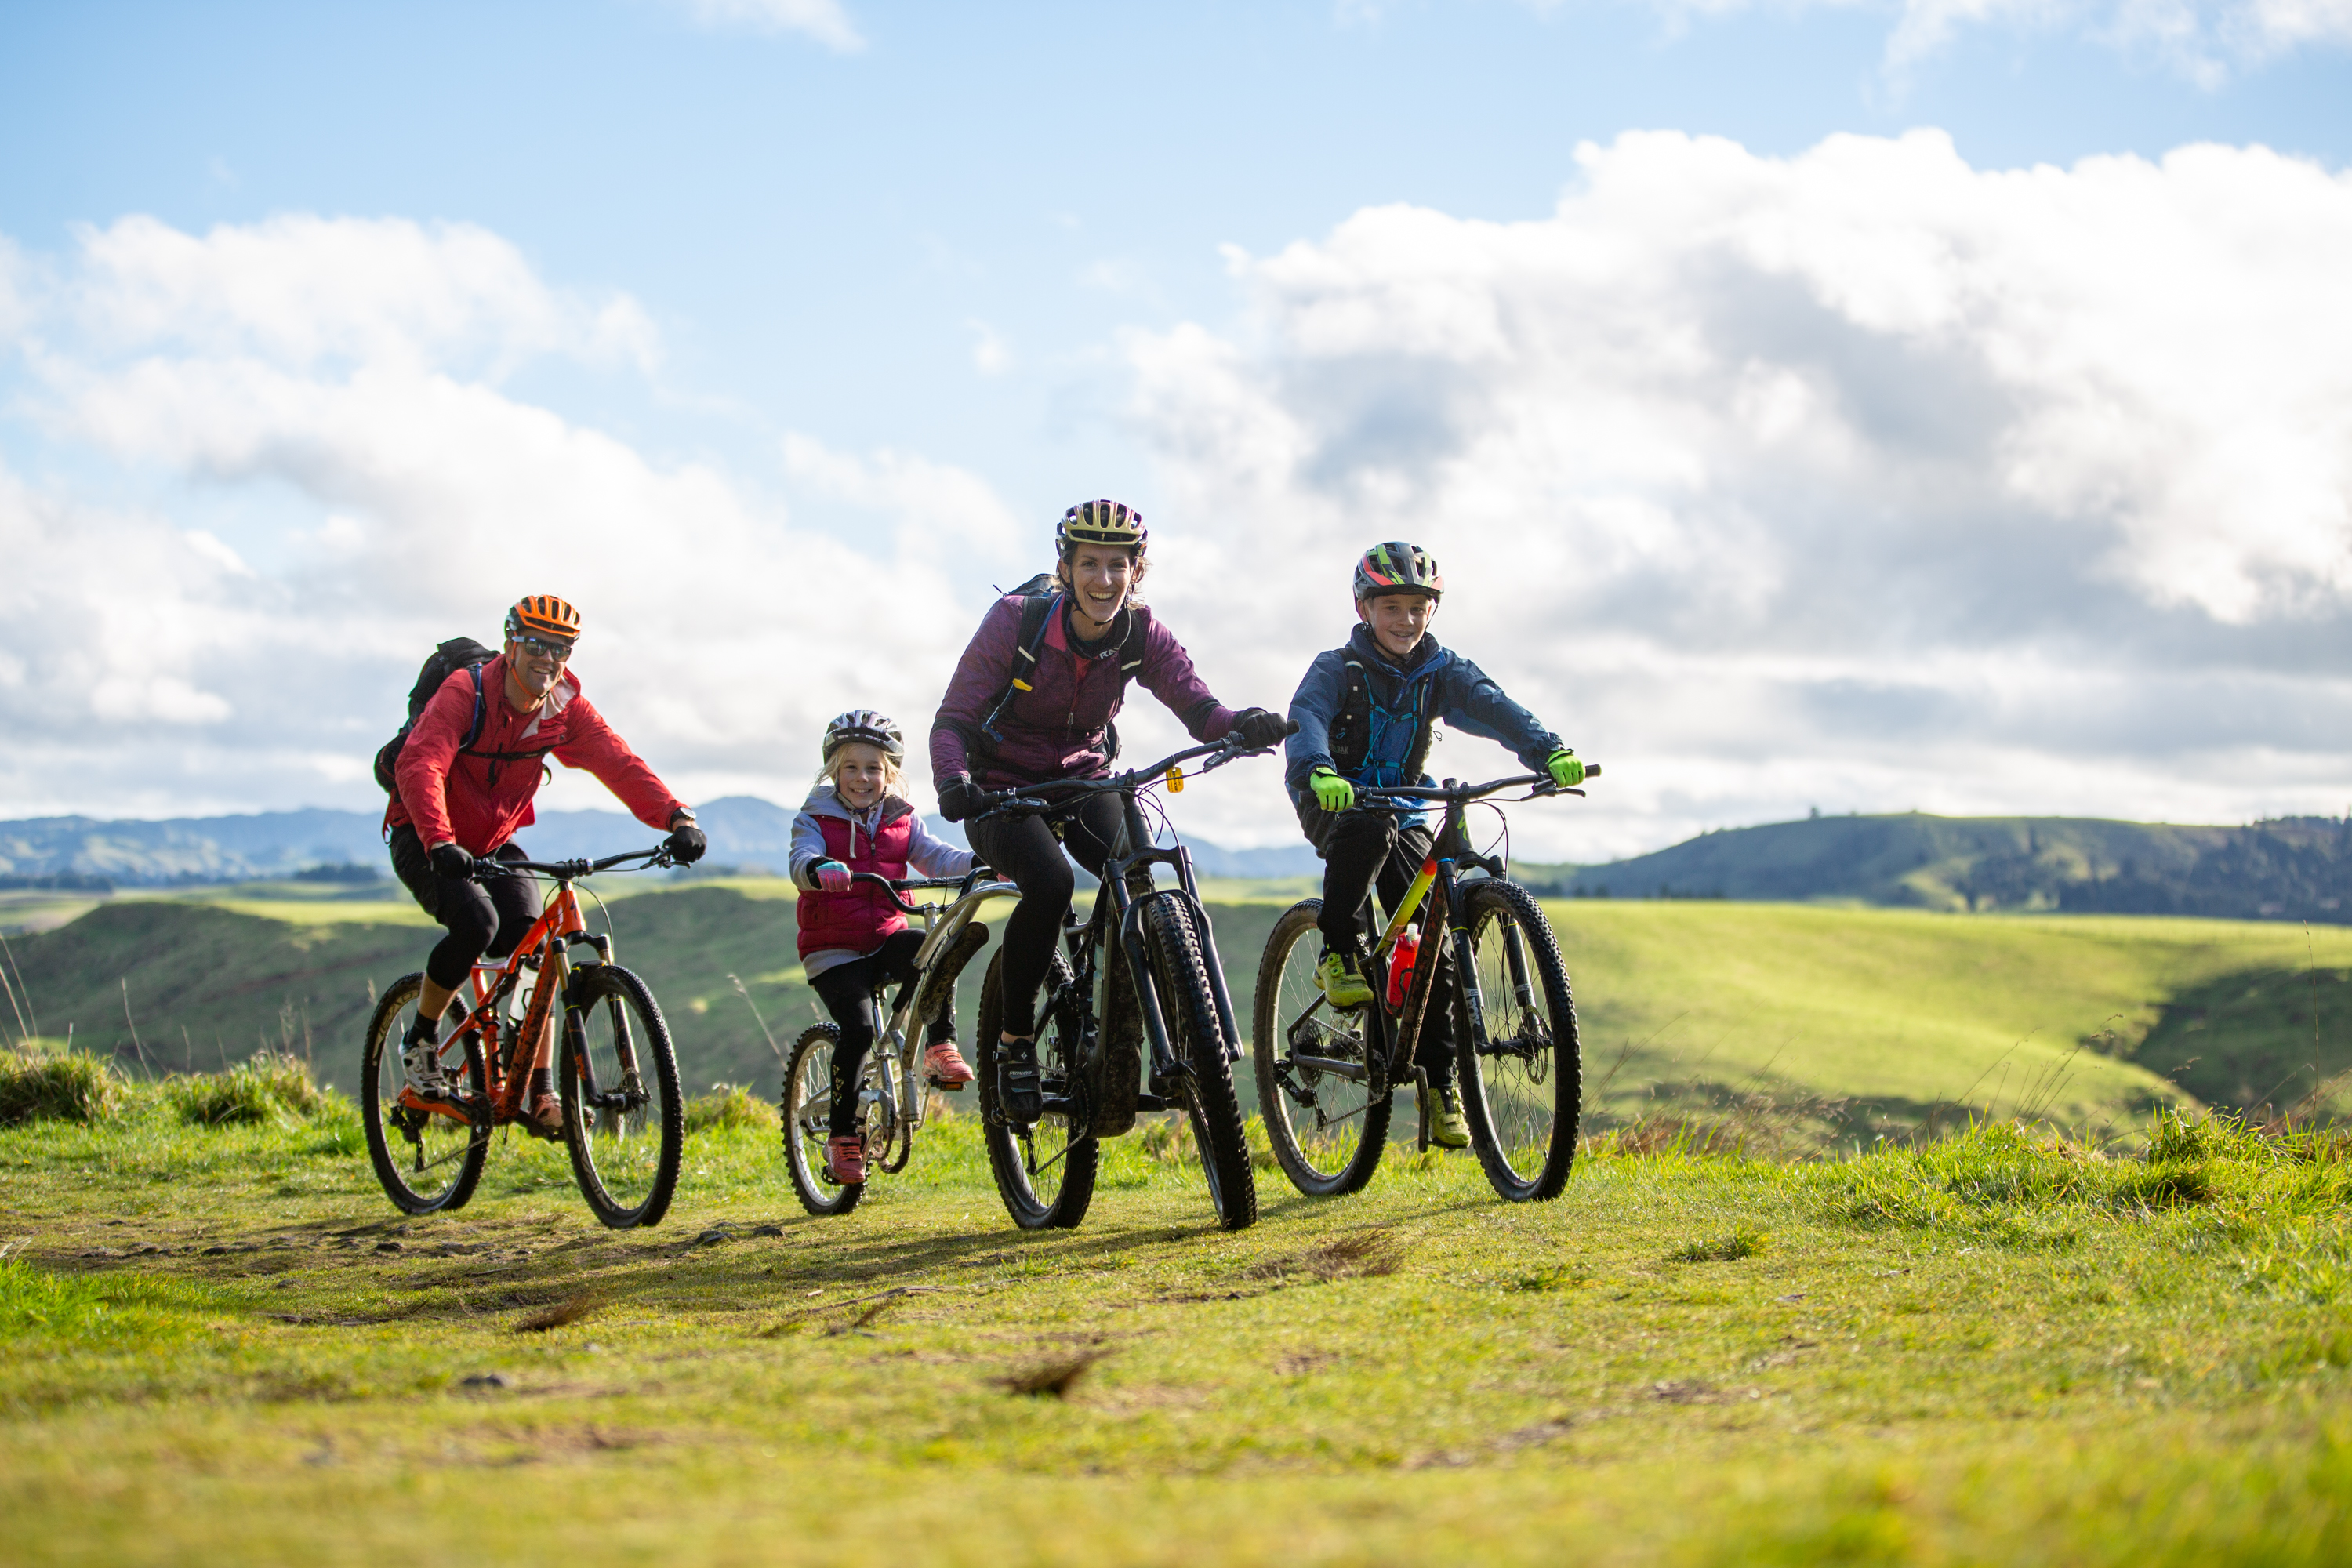 Ohakune Old Coach Road is perfect for beginners or family bike adventures.